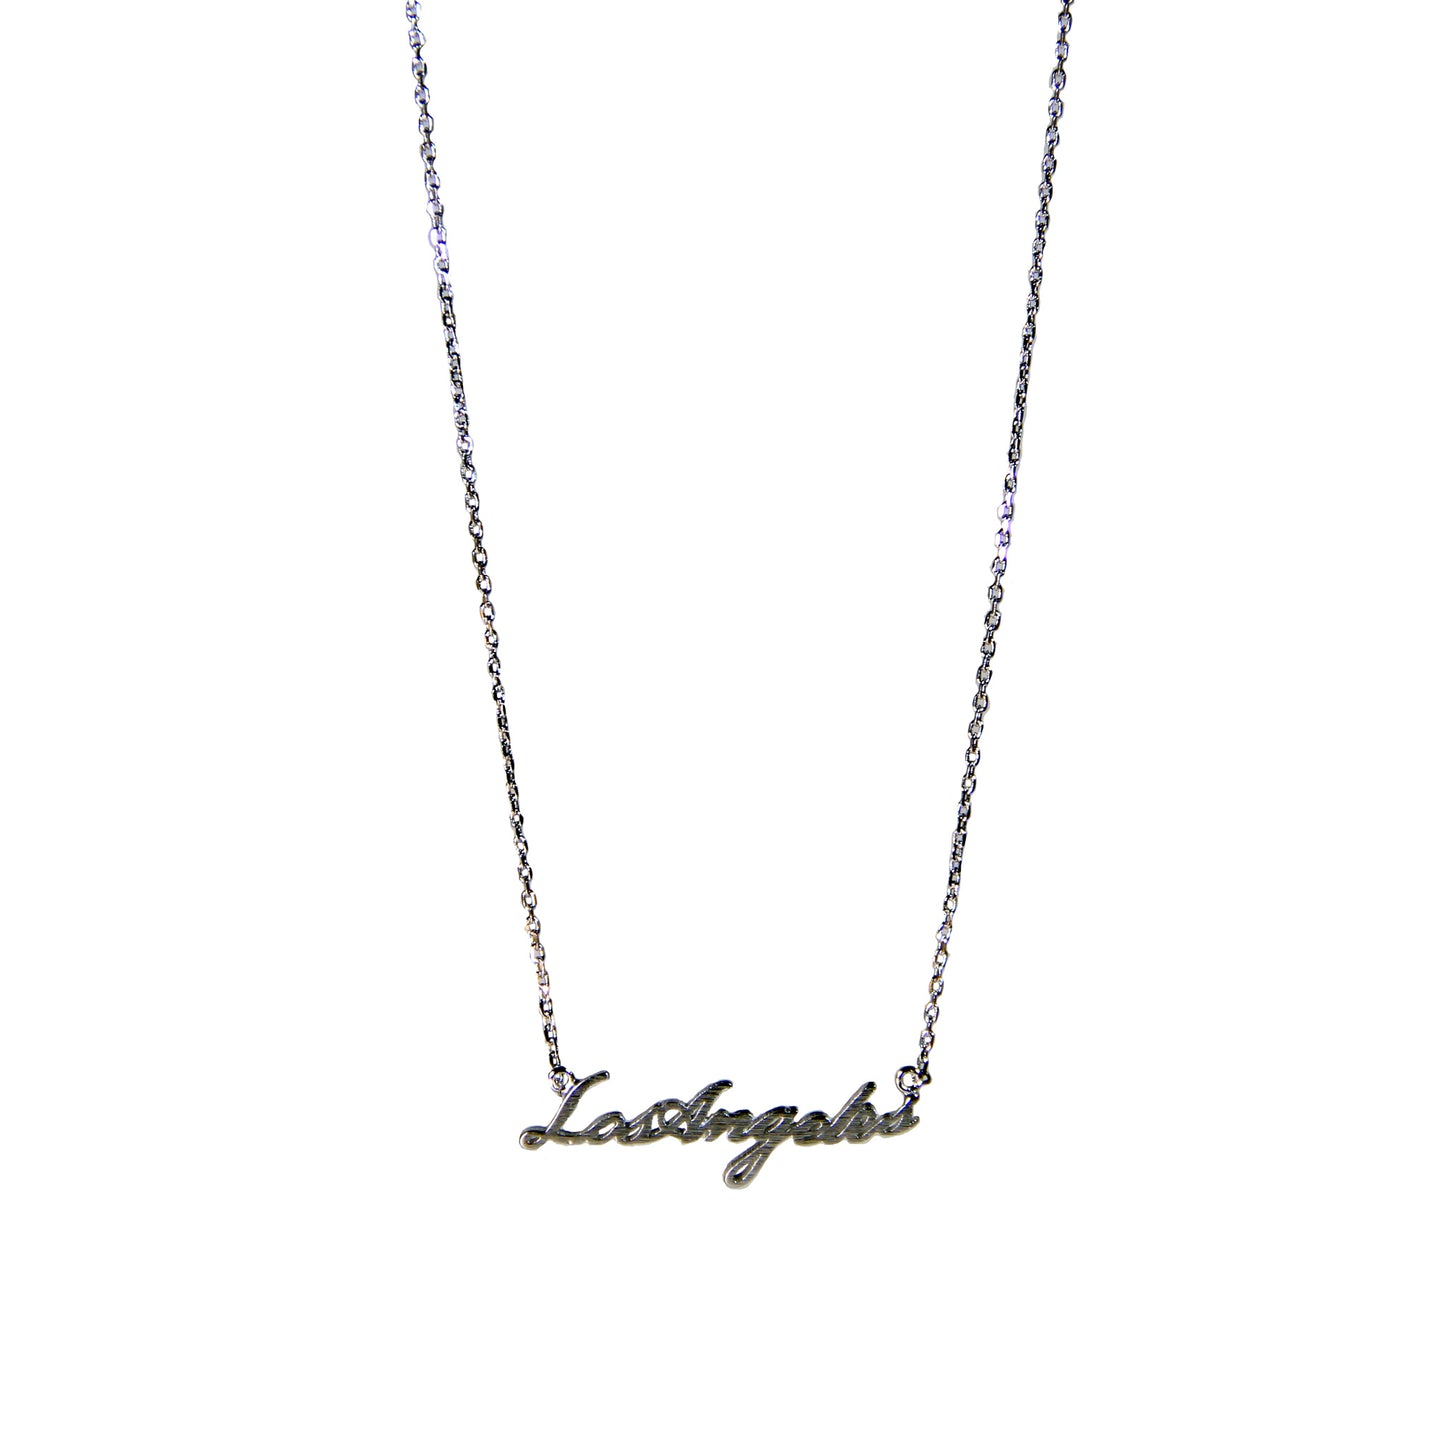 Los Angeles Silver Necklace. Represent your city by wearing this cute statement piece. Los Angeles, California.